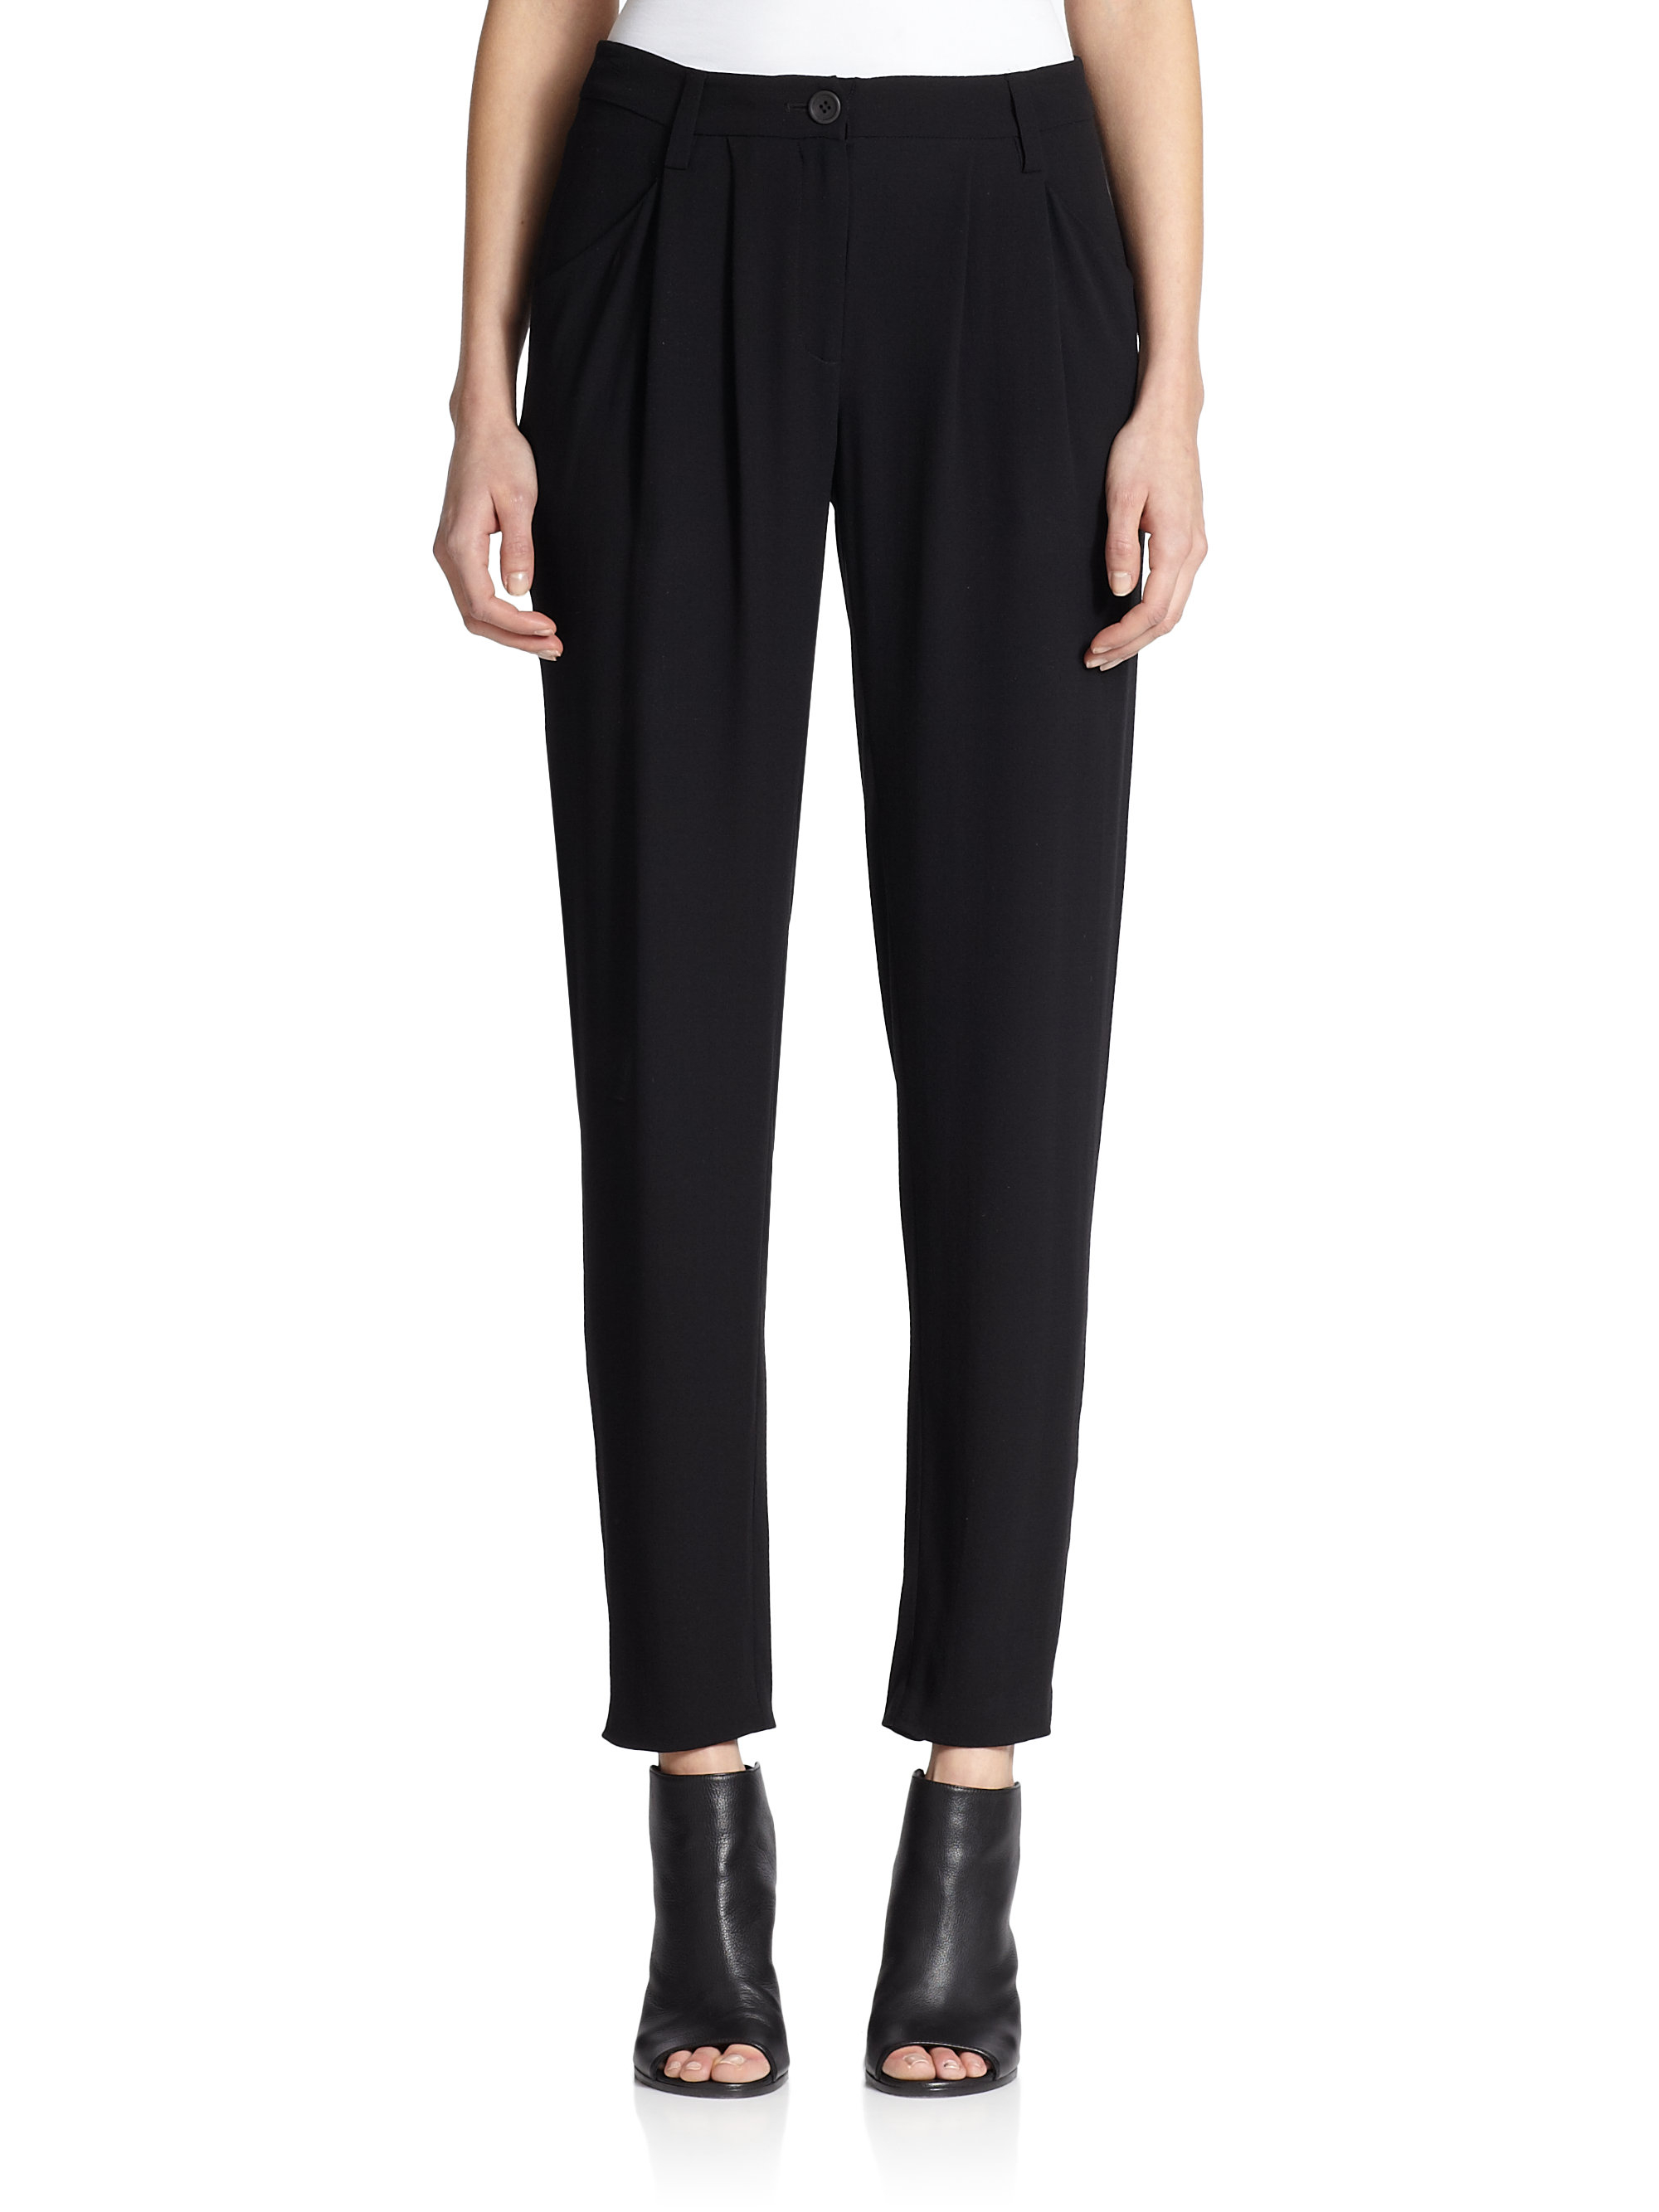 Lyst - Eileen Fisher Silk Relaxed Pants in Black